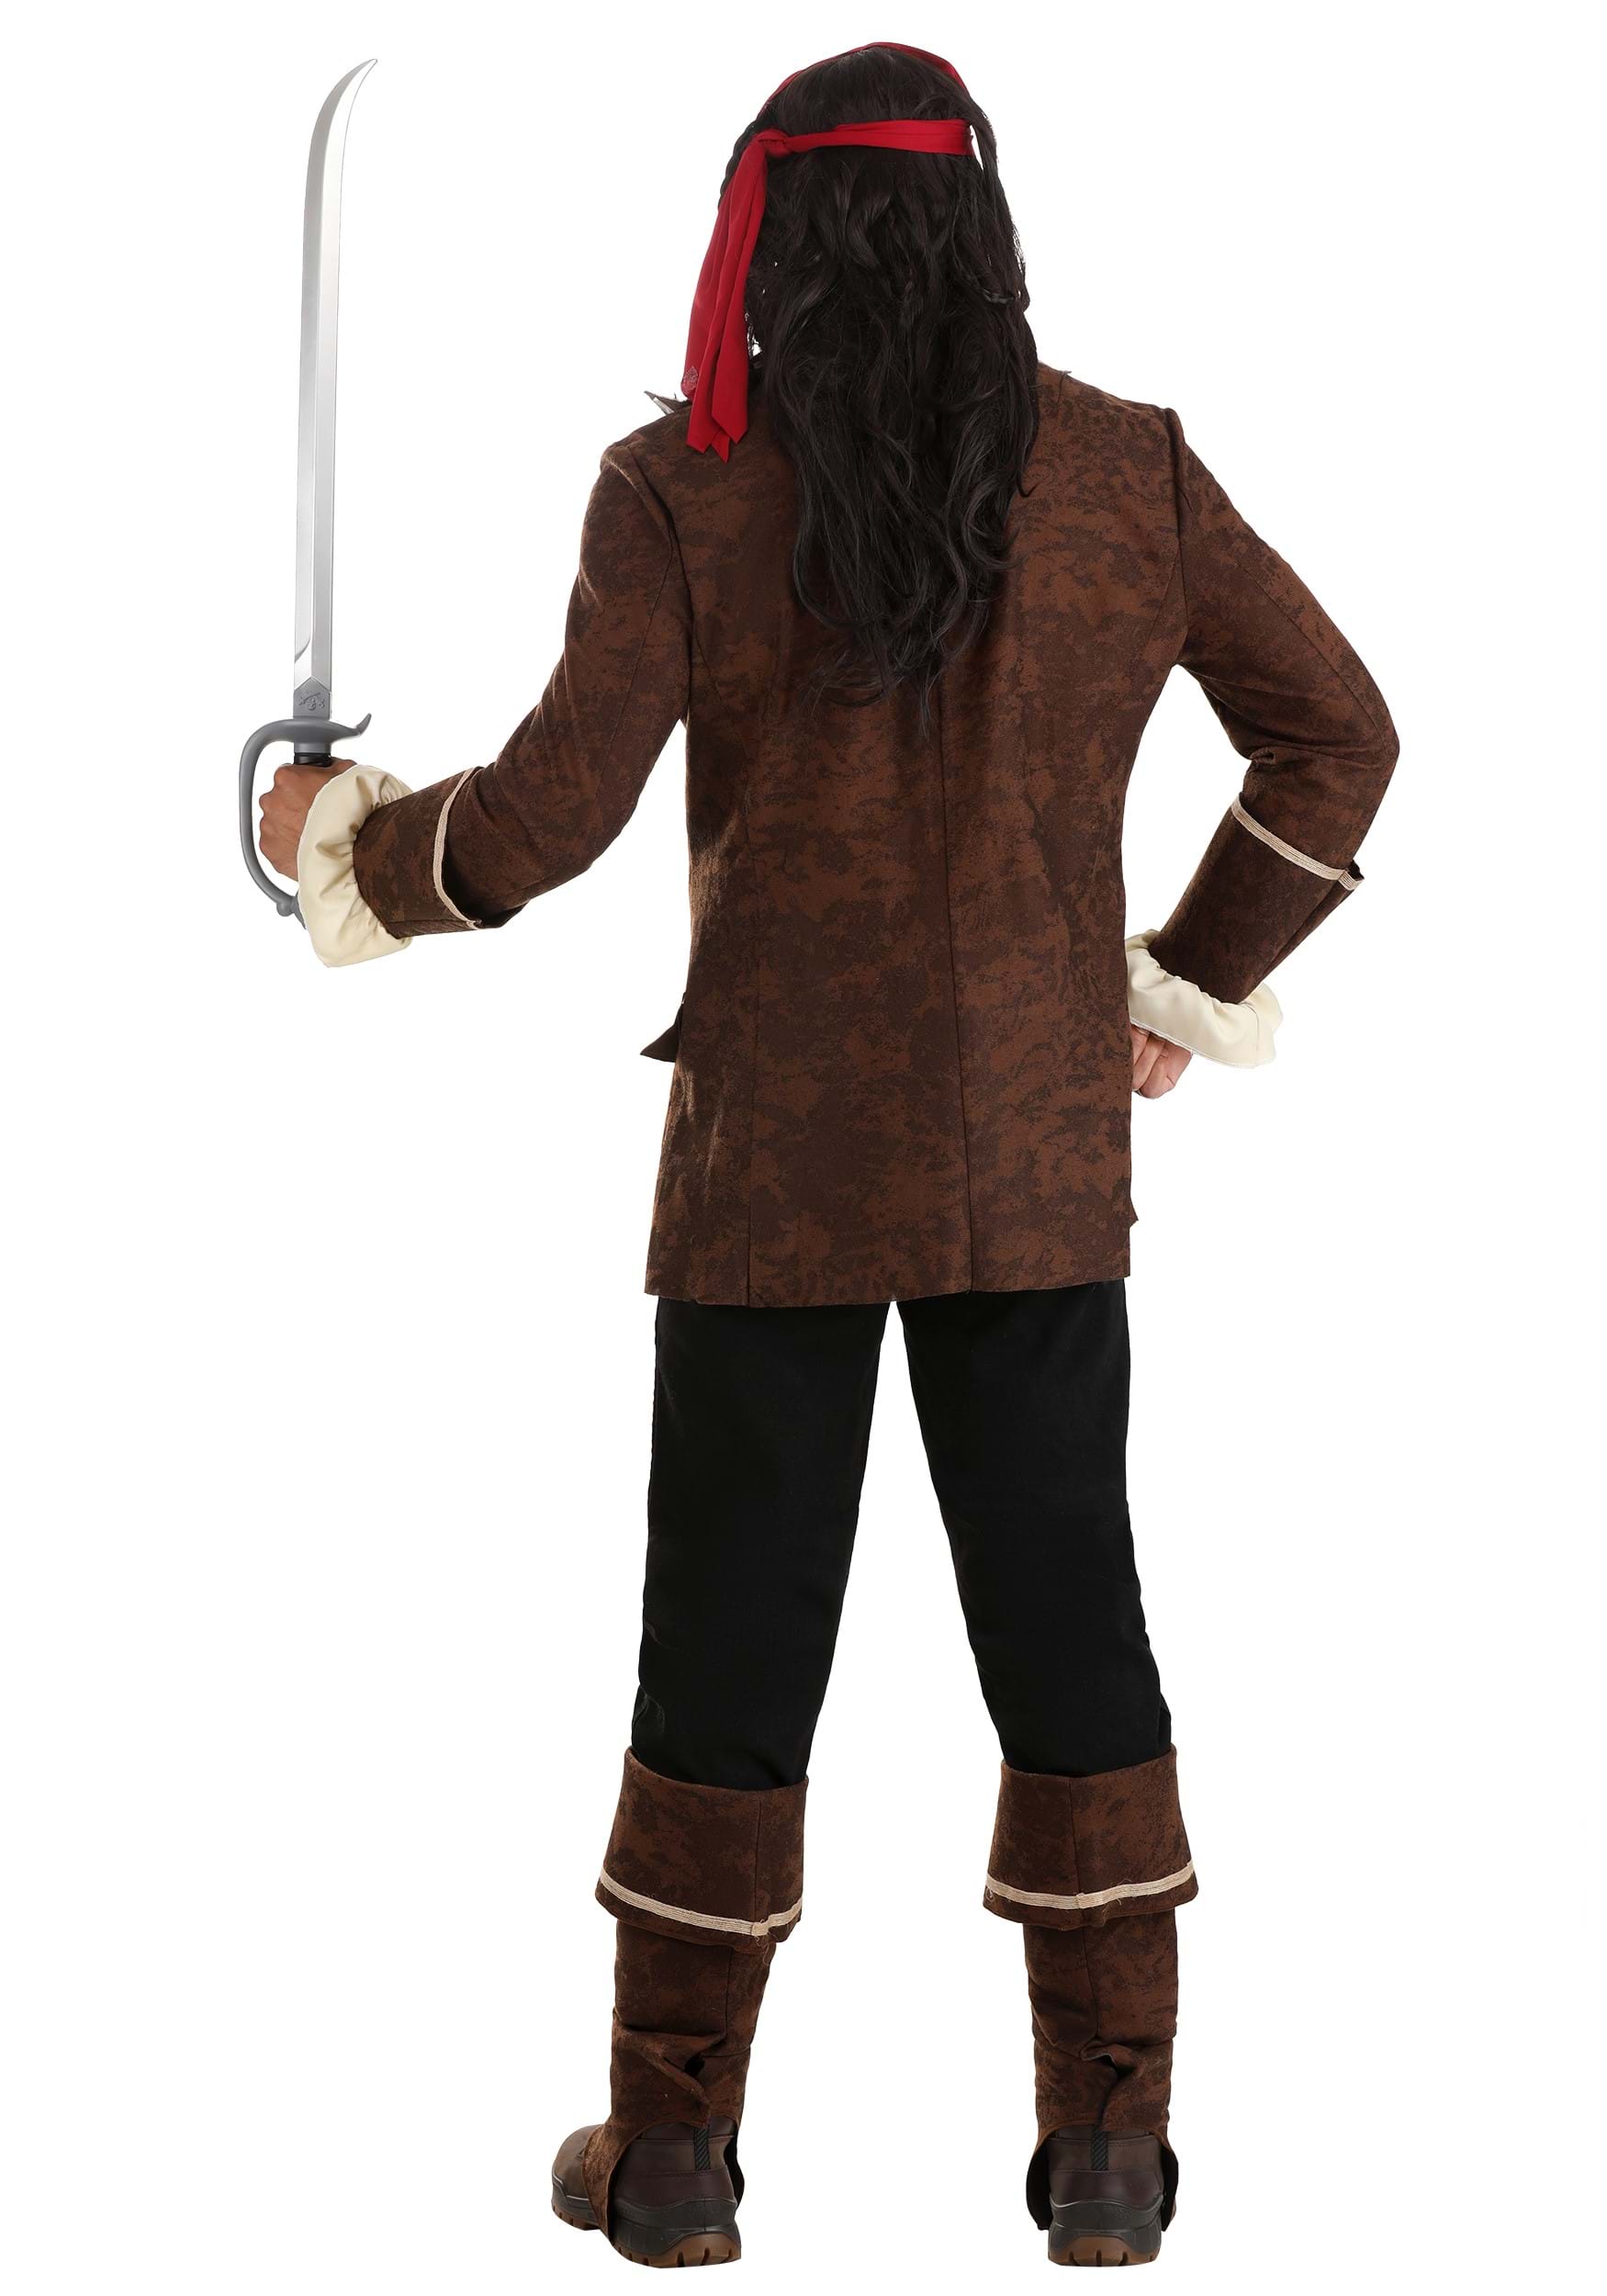 Plunderous Pirate Costume For Adults